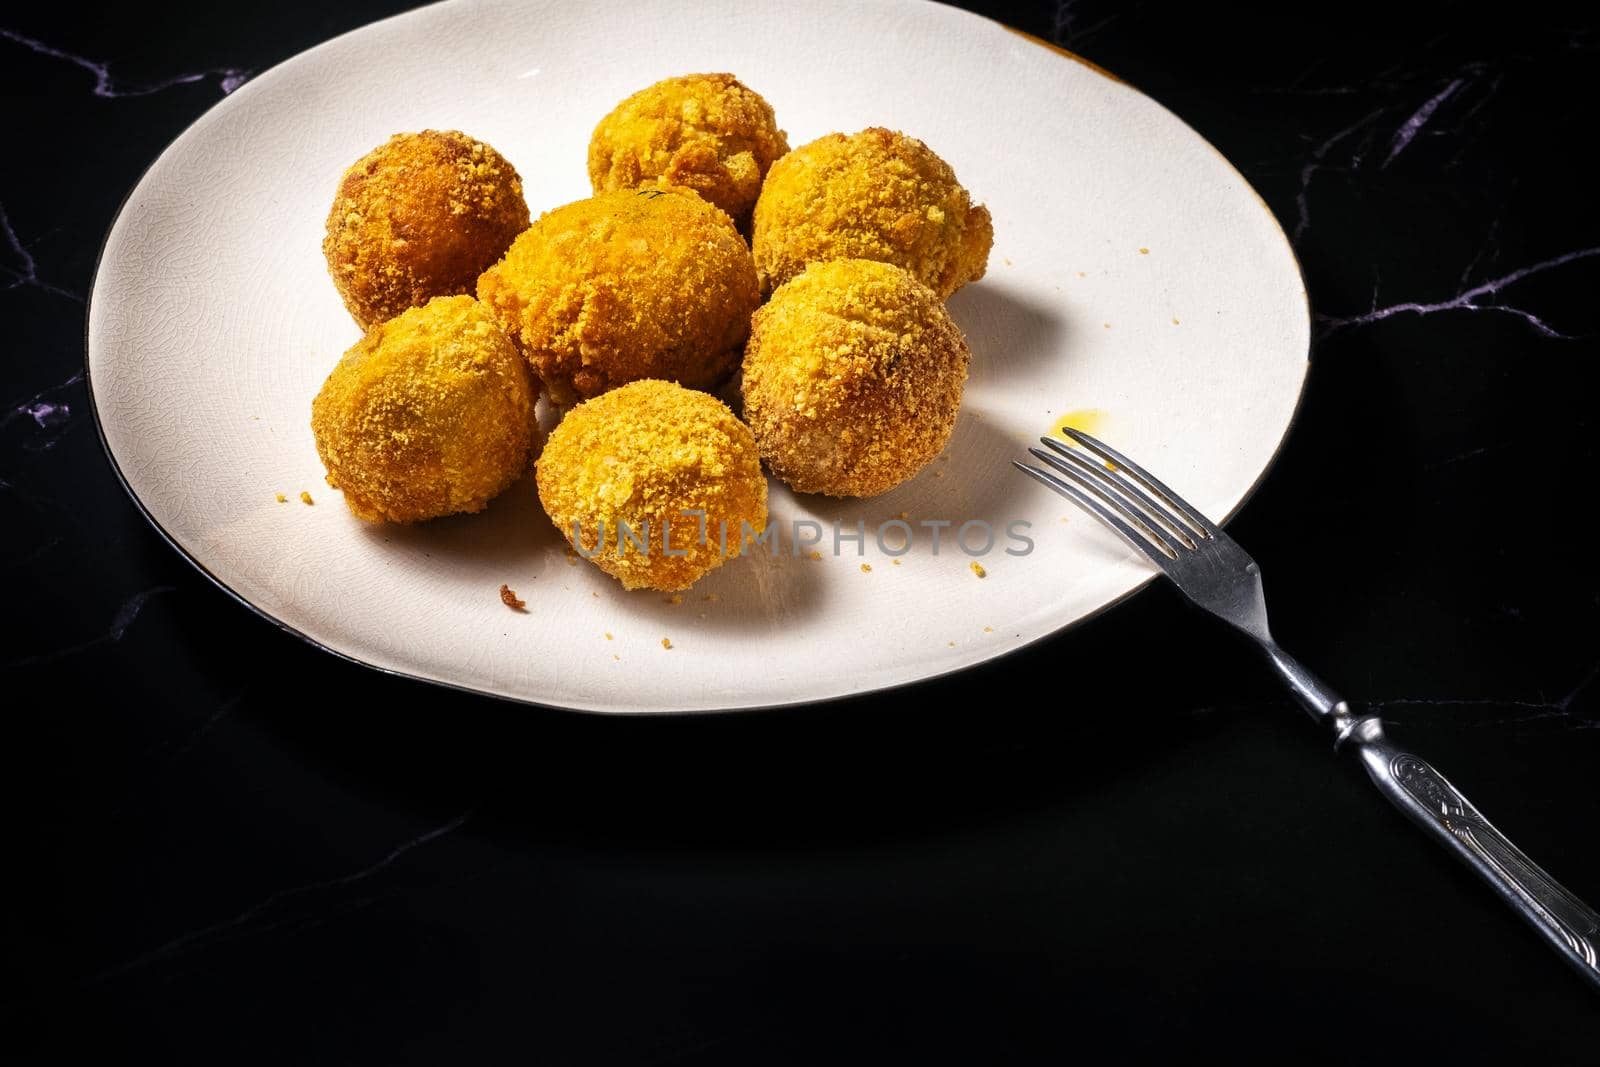 cheese balls with garlic and dill inside for a snack in a plate on a black background.